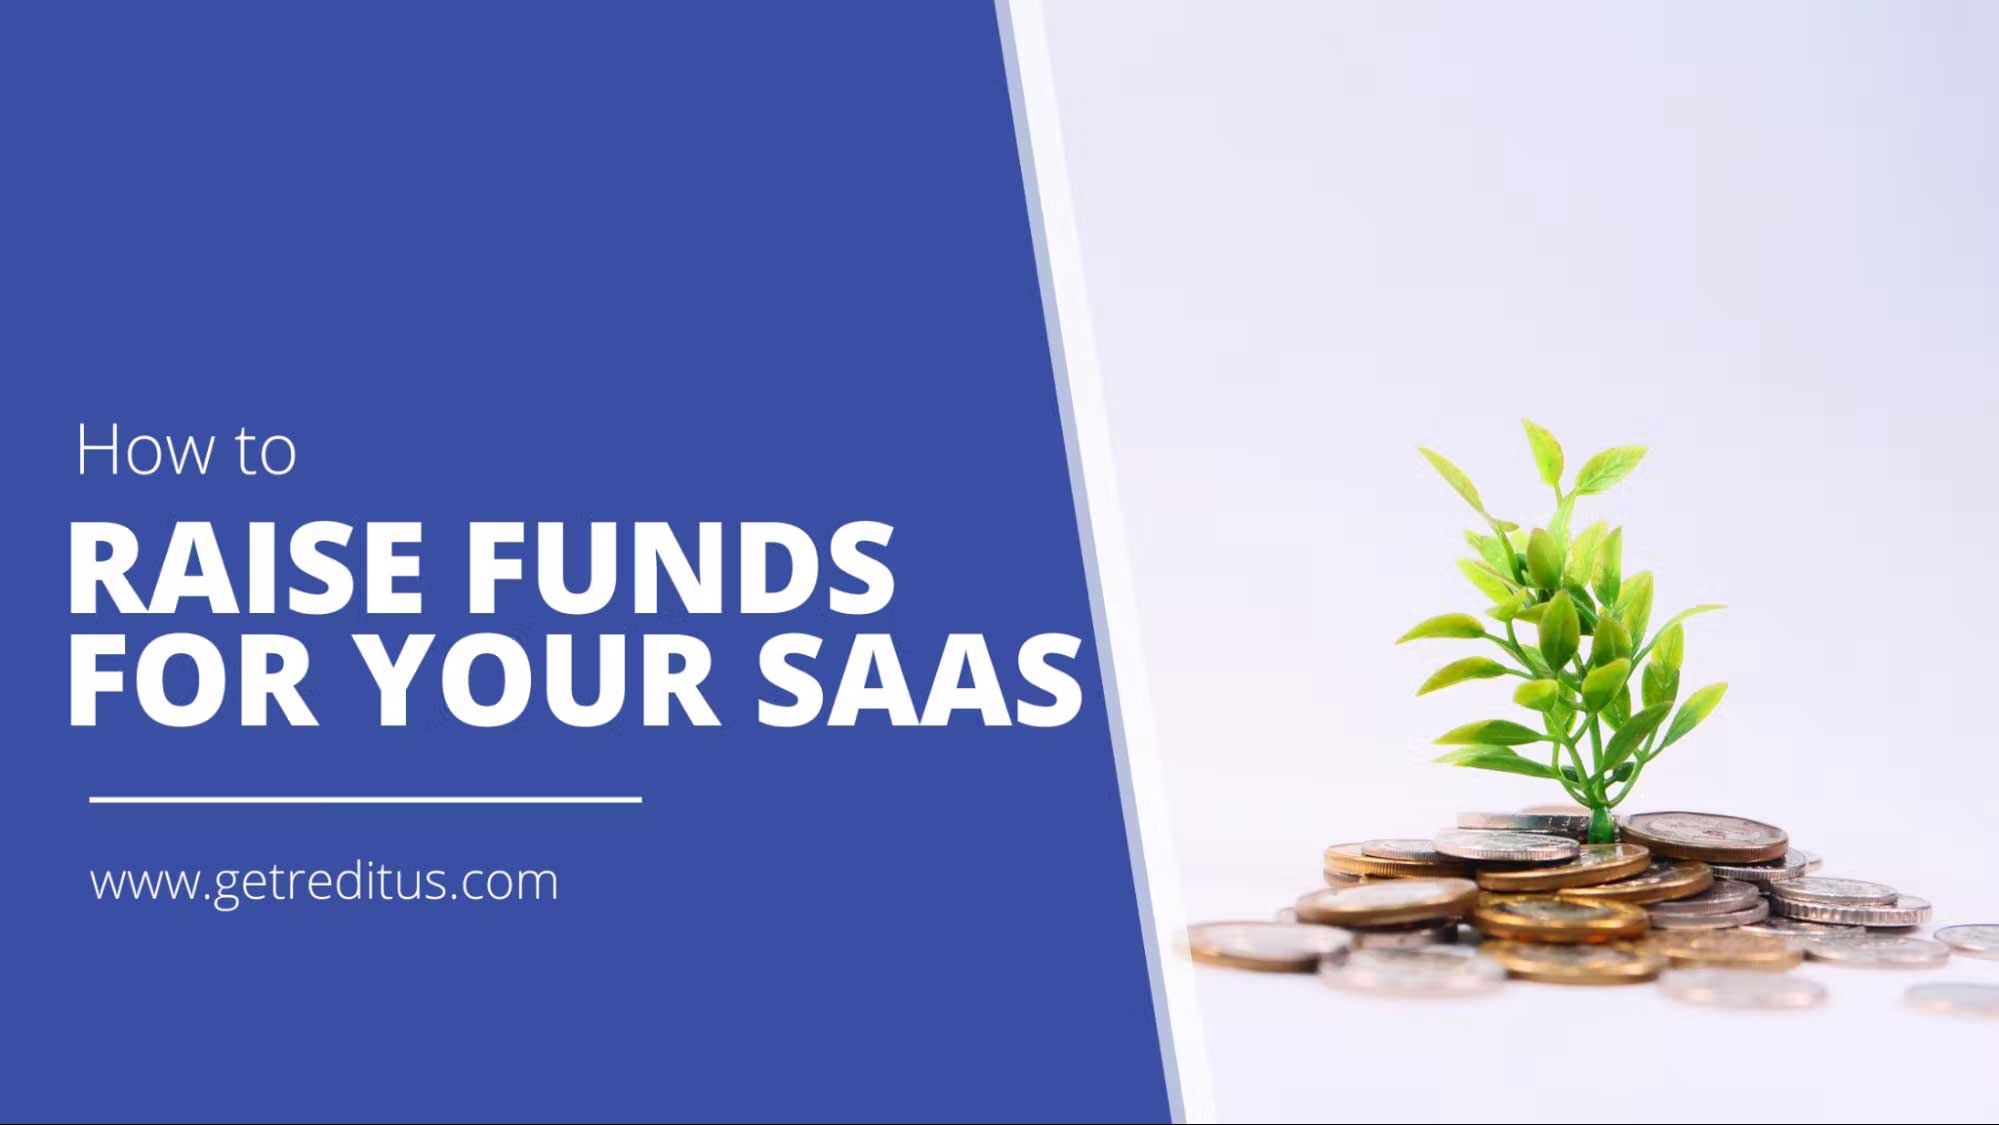 How To Raise Funds for Your SaaS. Guide to get you funding.